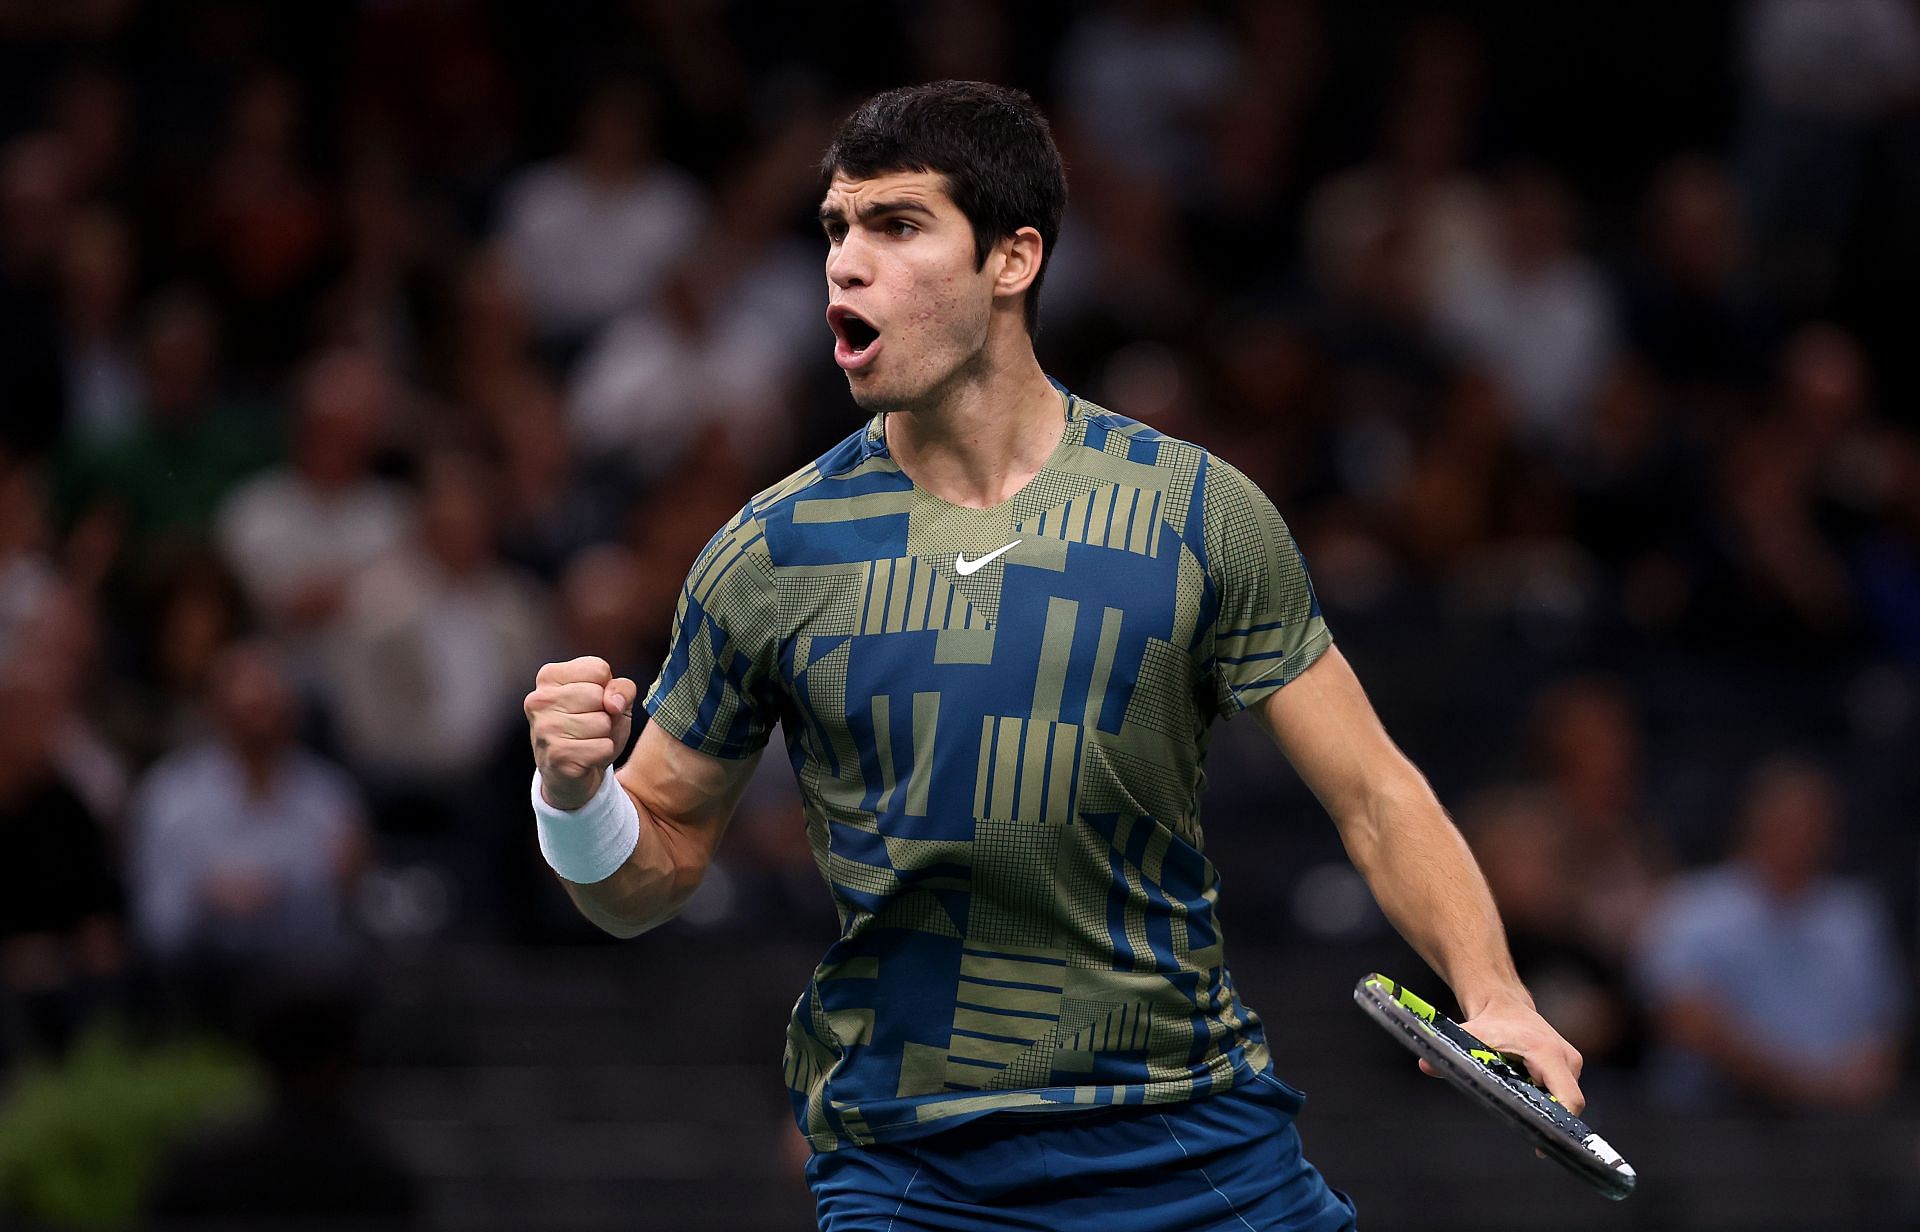 Carlos Alcaraz is set for his first tournament since the 2022 Rolex Paris Masters.